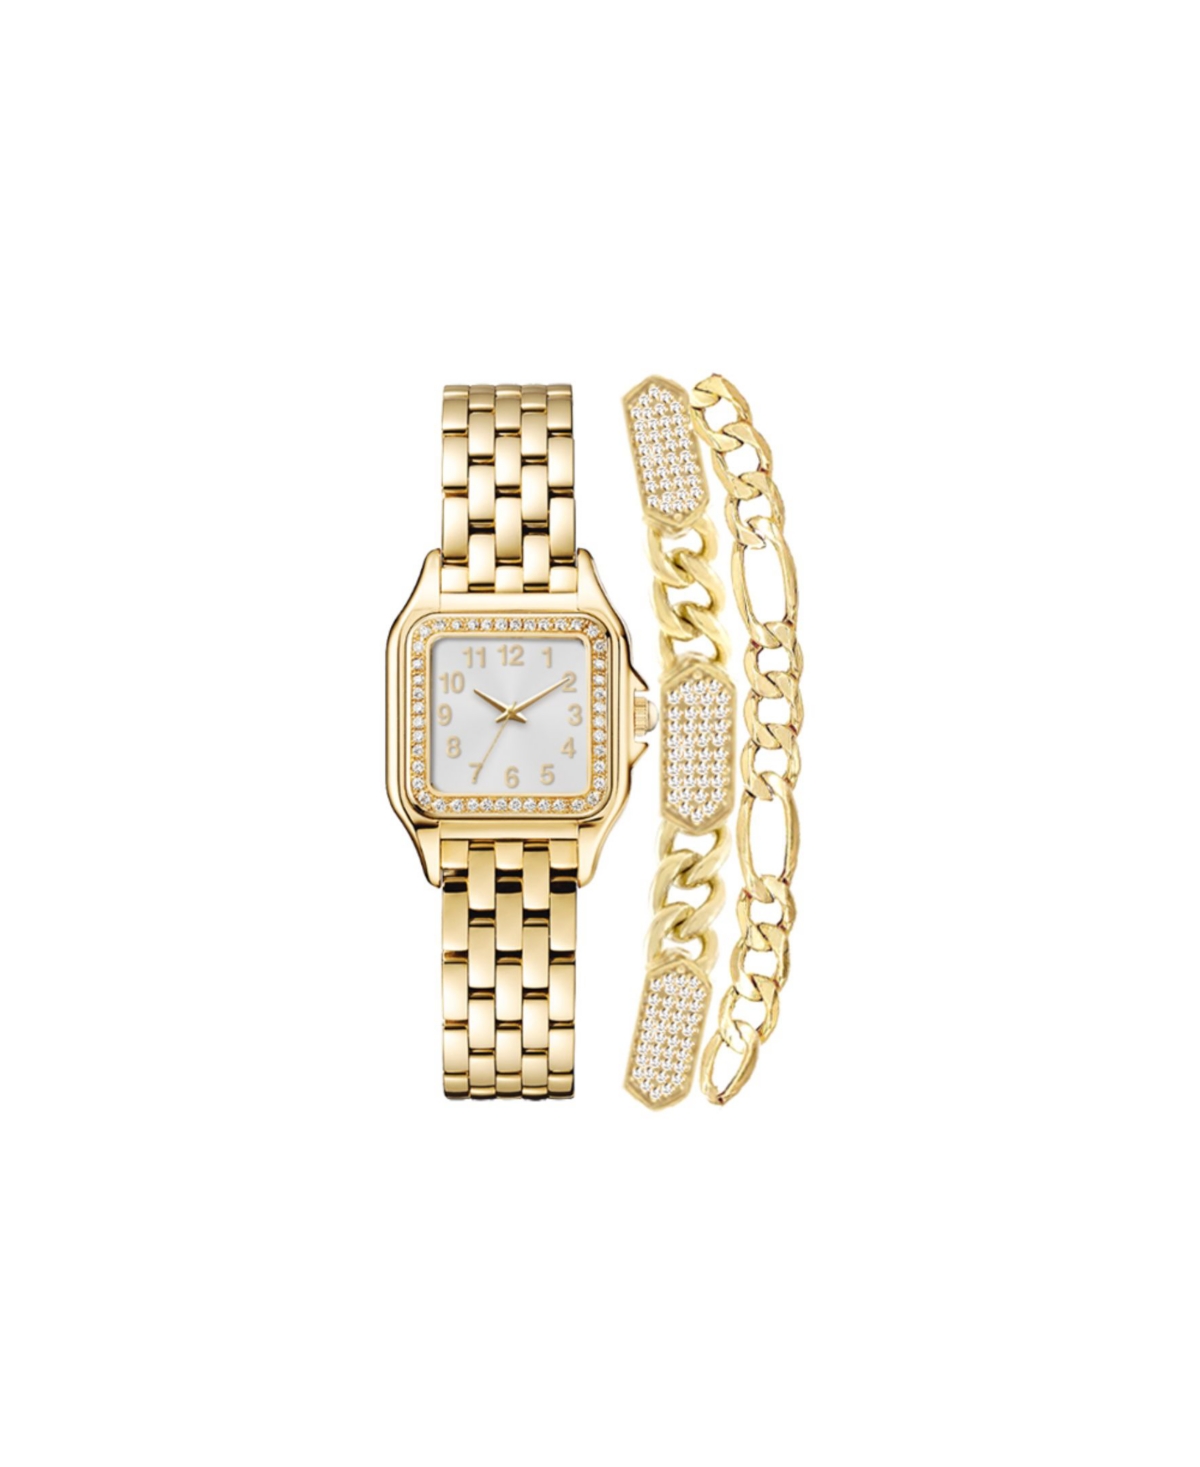 Women's Analog Gold-Tone Metal Alloy Watch 26mm and Set, 3 Pieces - Shiny Gold